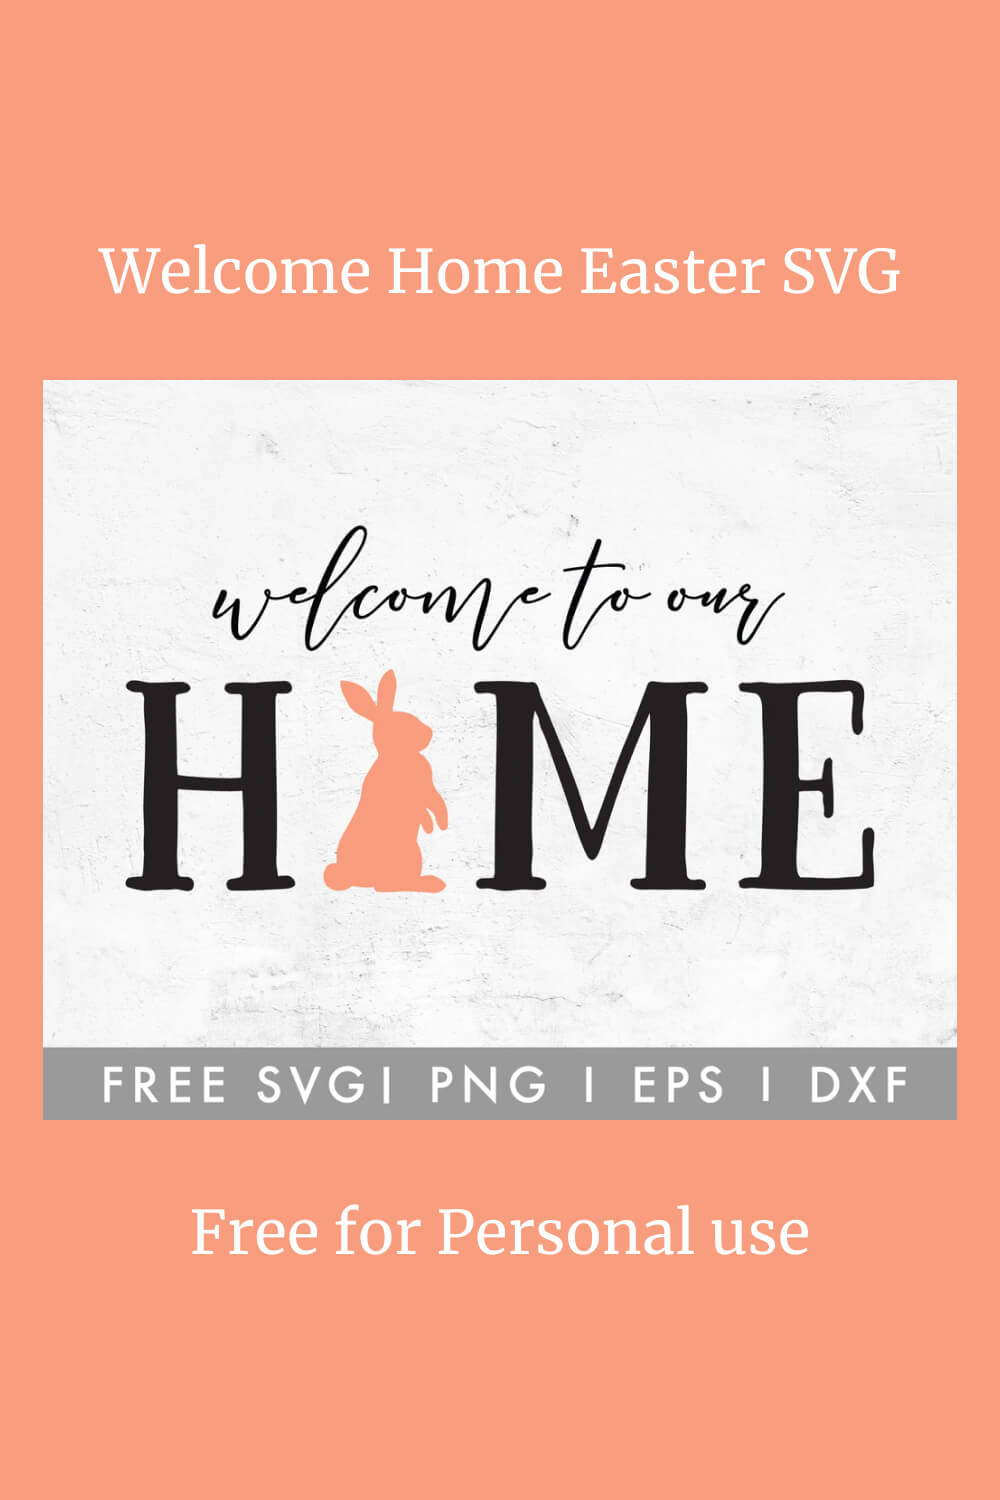 The title "Welcome to our home" is decorated with an Easter bunny.